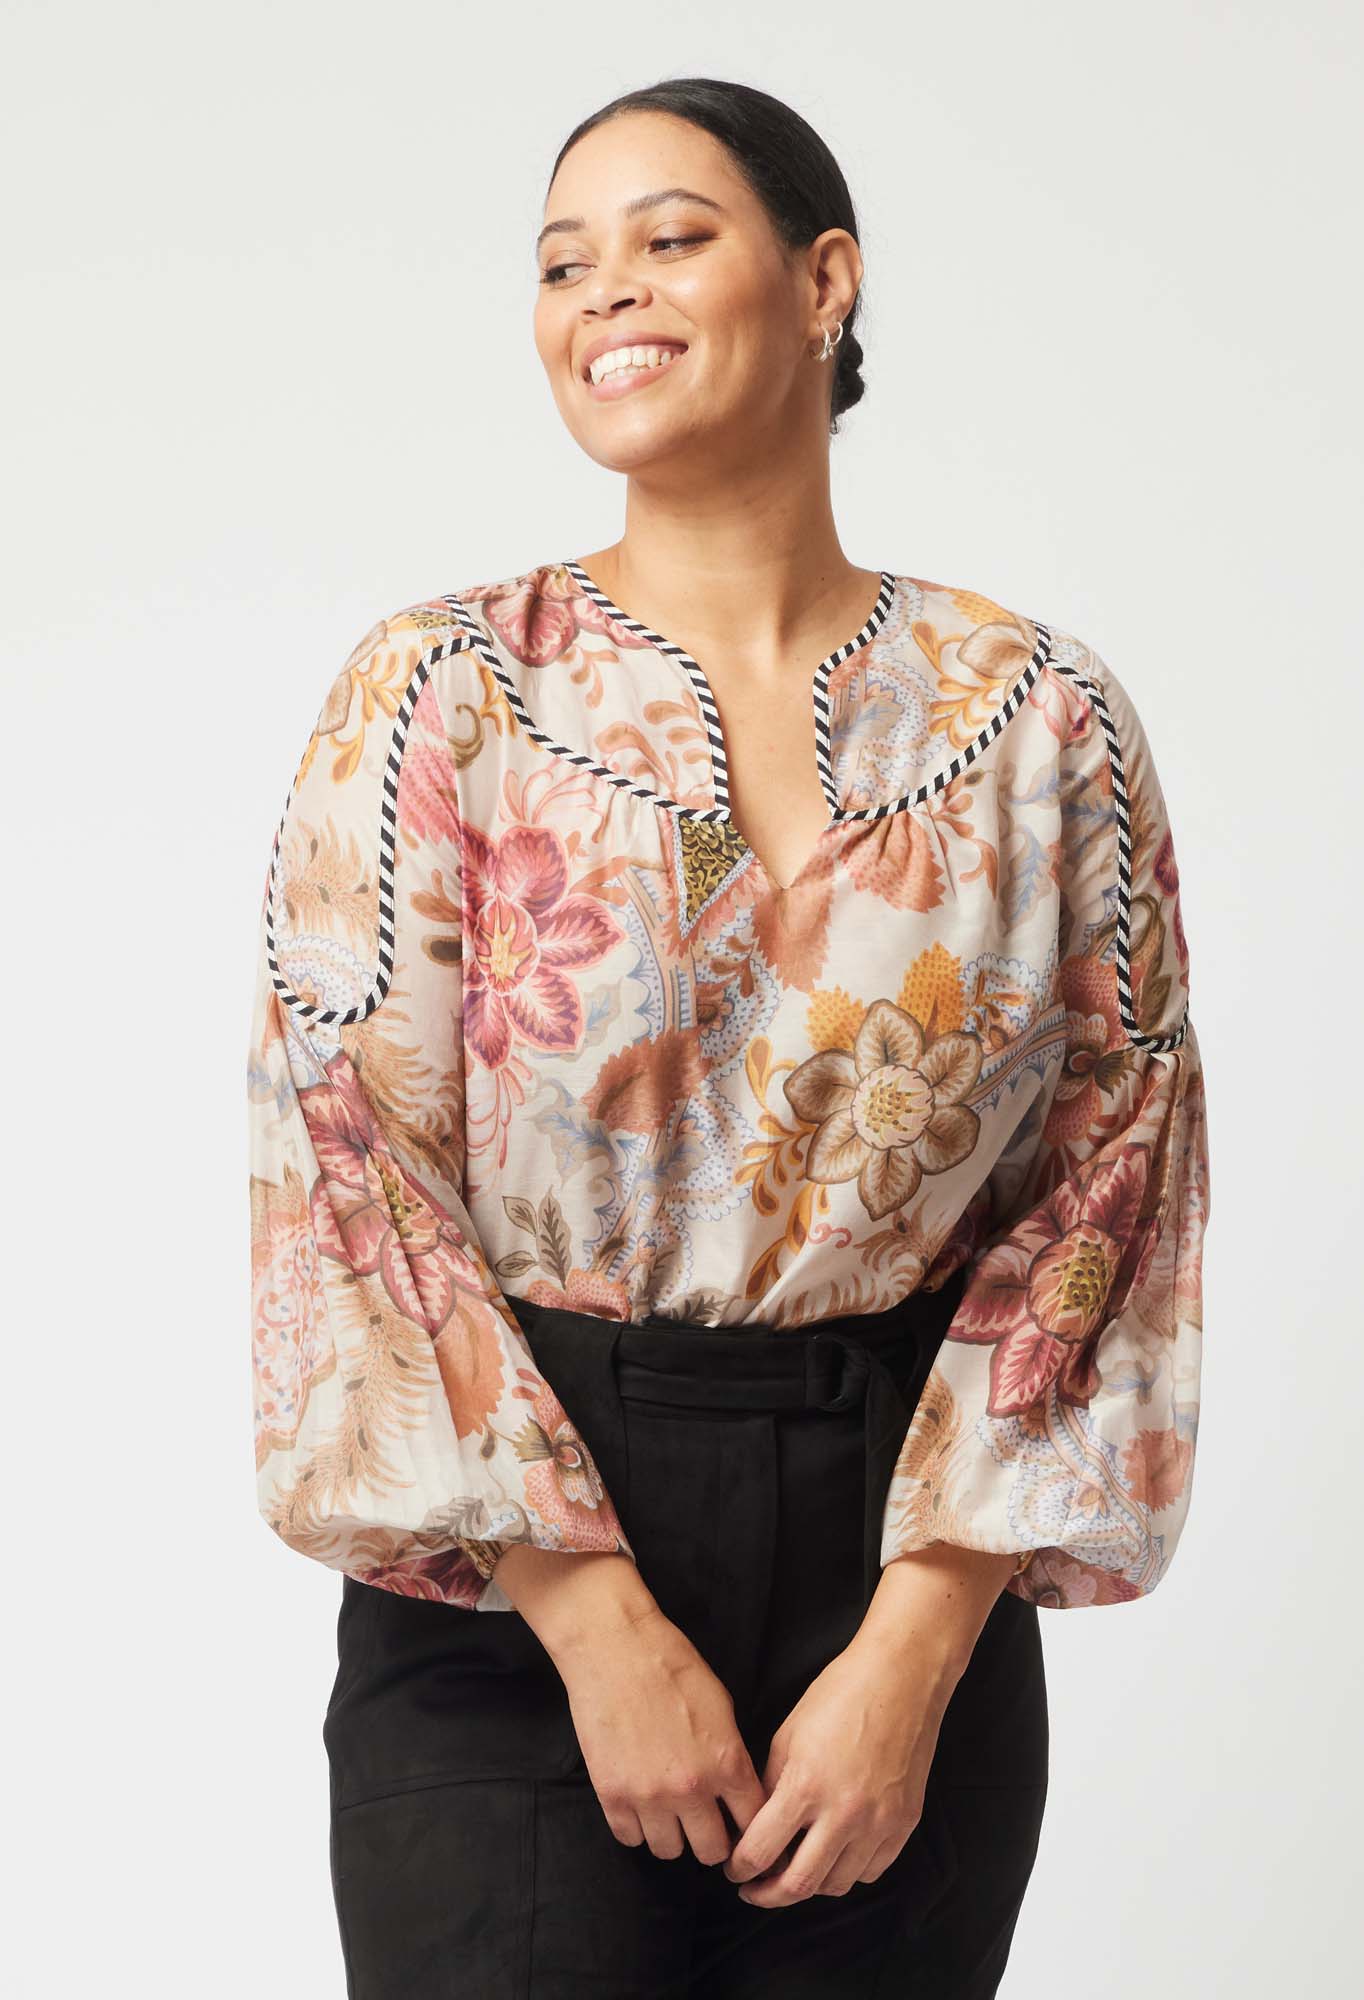 Altair Cotton Silk Top in Aries Floral